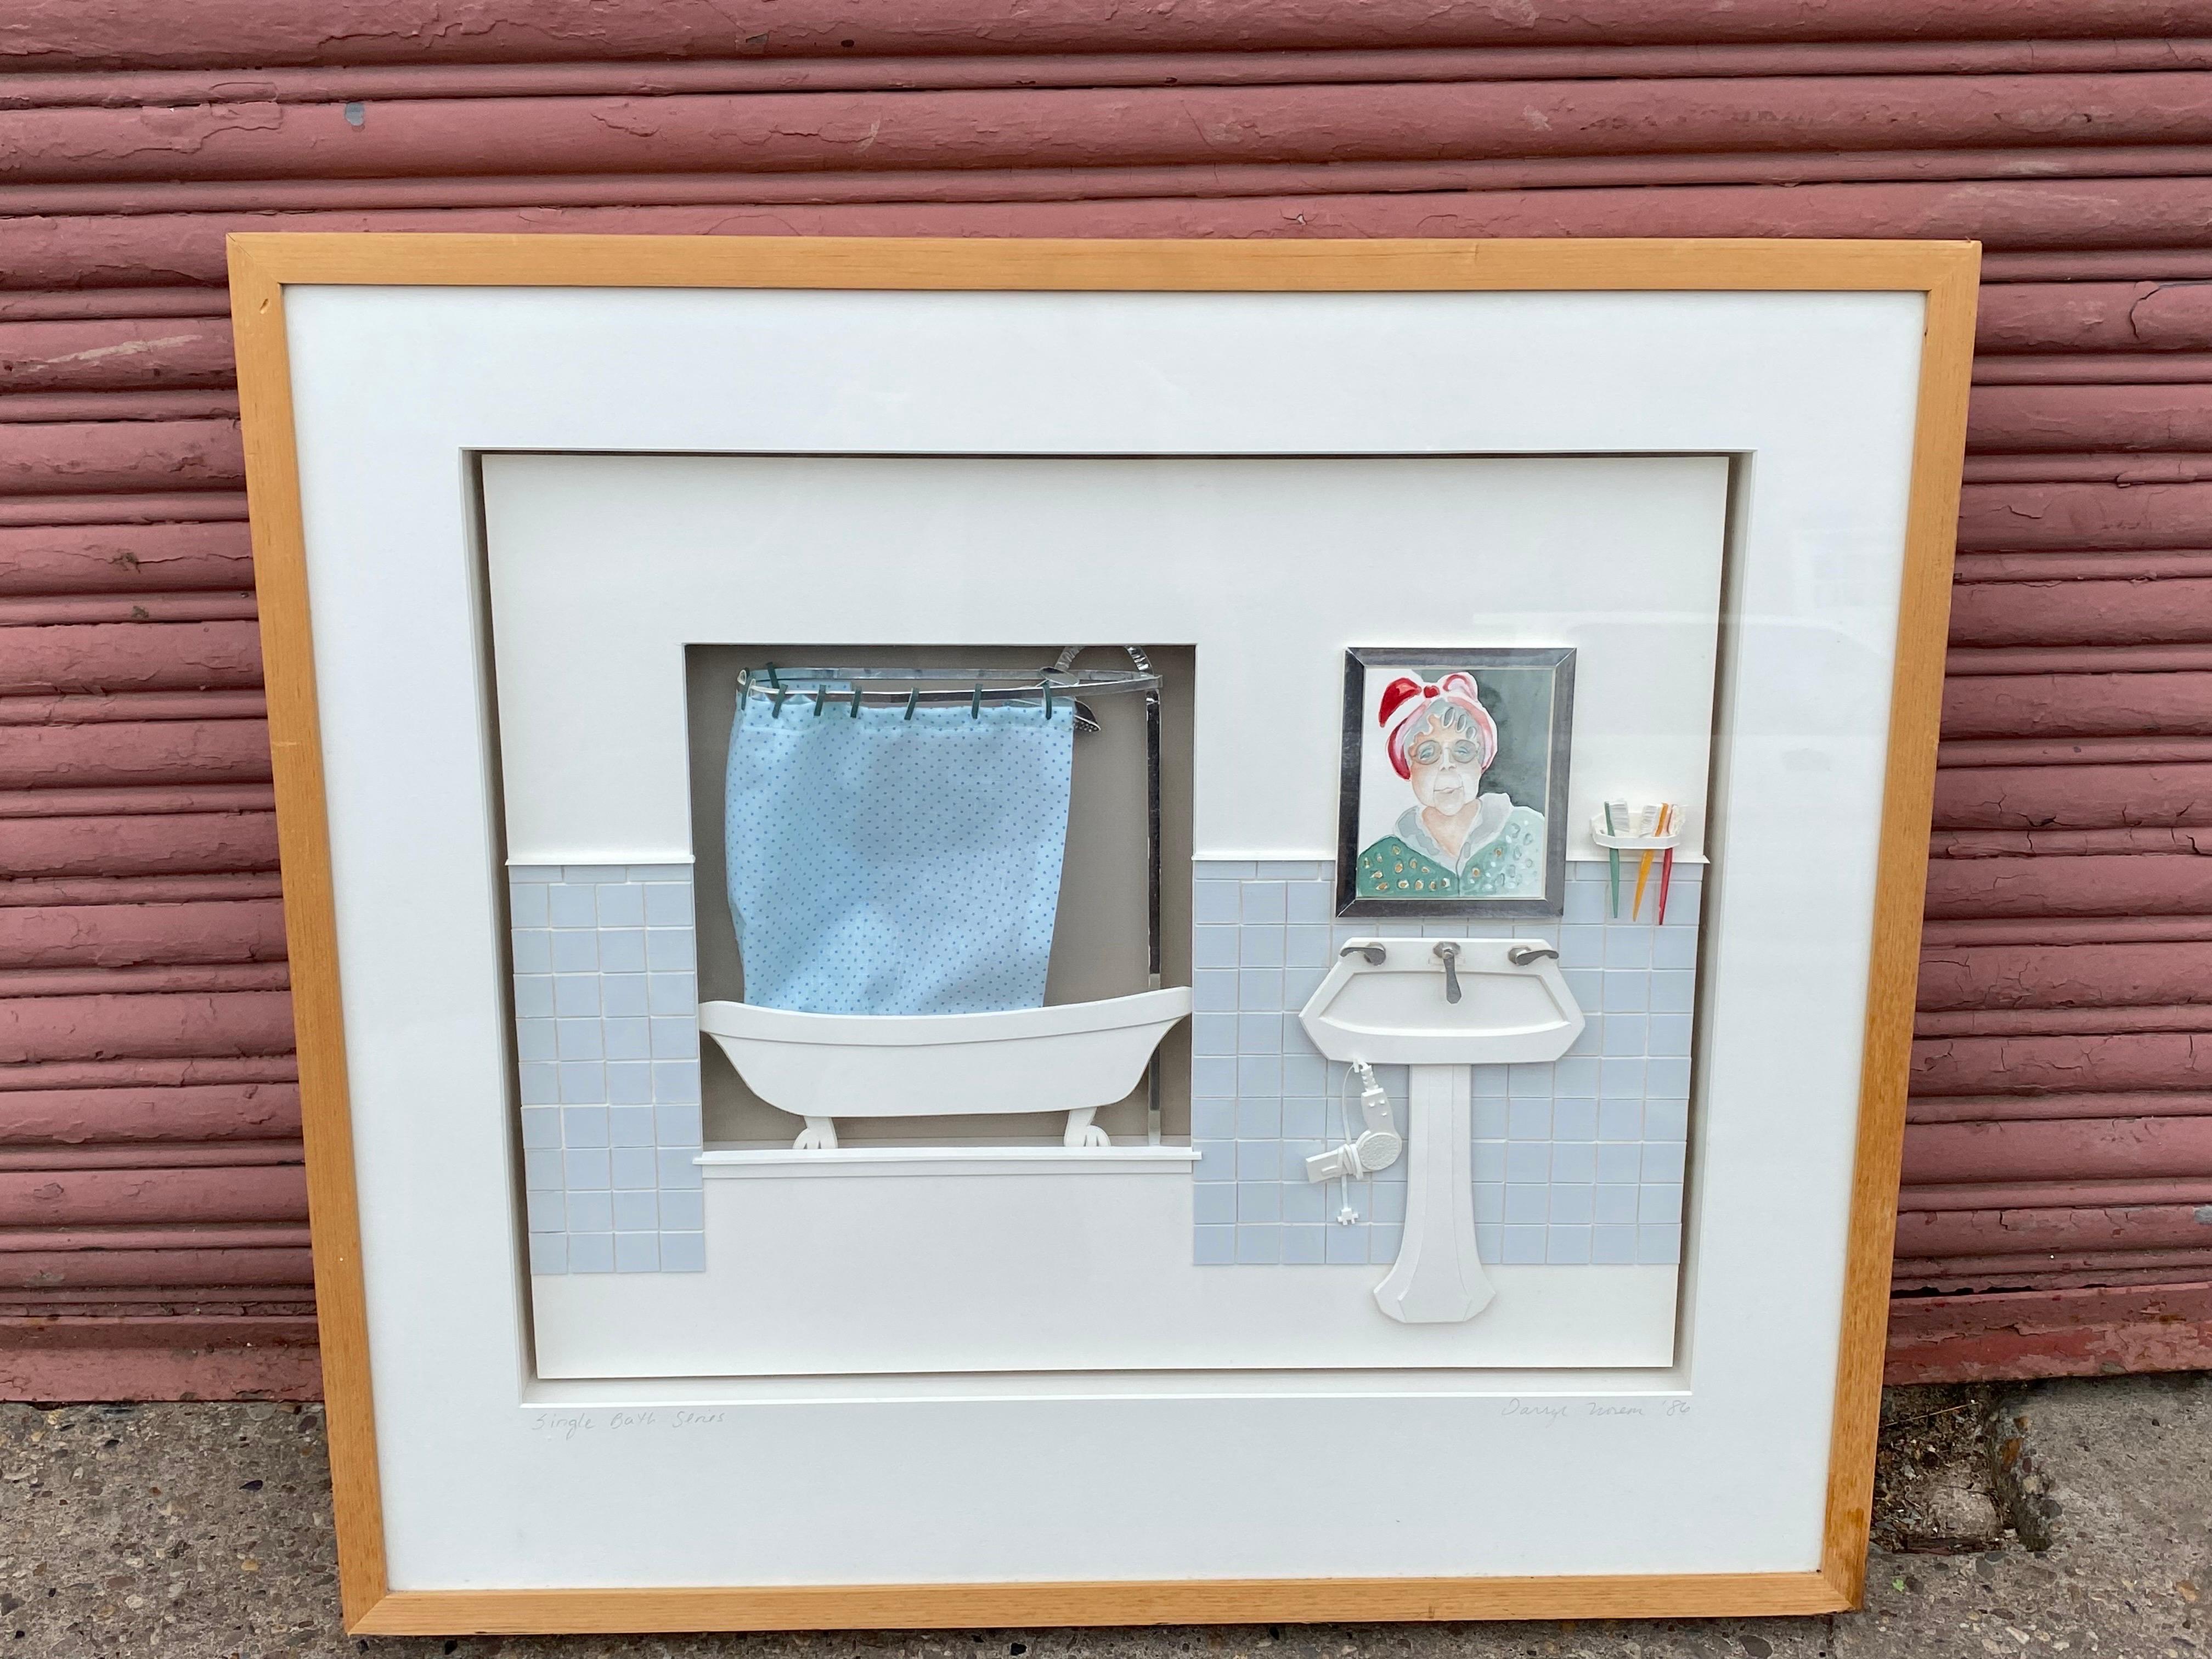 Signed cut paper painting of a bathroom scene by artist Darryl Norem (1949-2011). Beautifully framed in a thick shadow box.  Clever Subject and execution!